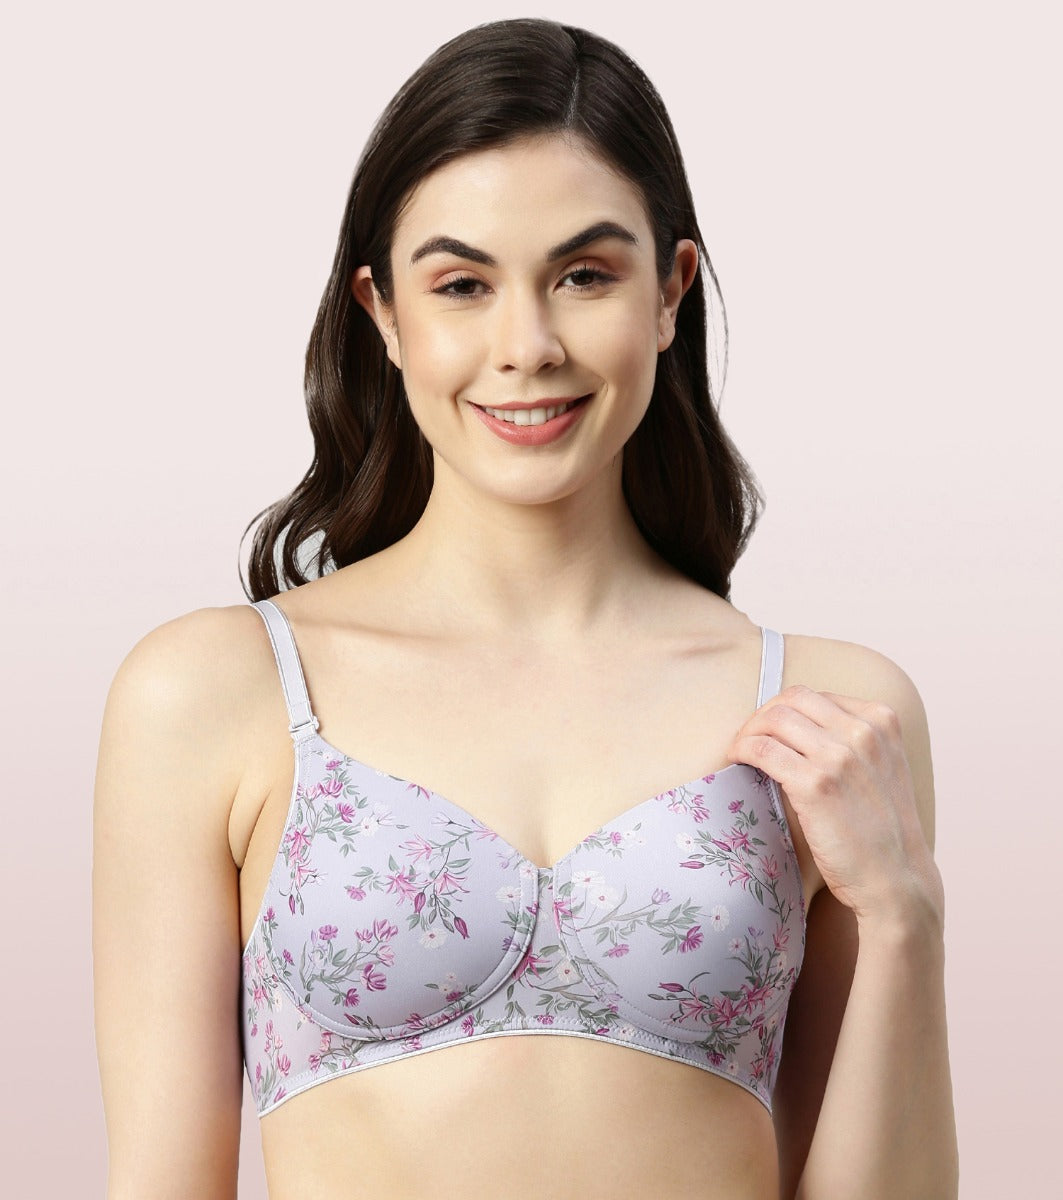 Enamor Dope Dye F165 Ecolite Fabric Smooth Support Bra for Women - Padded, Wirefree and High Coverage - Dainty Petal Print